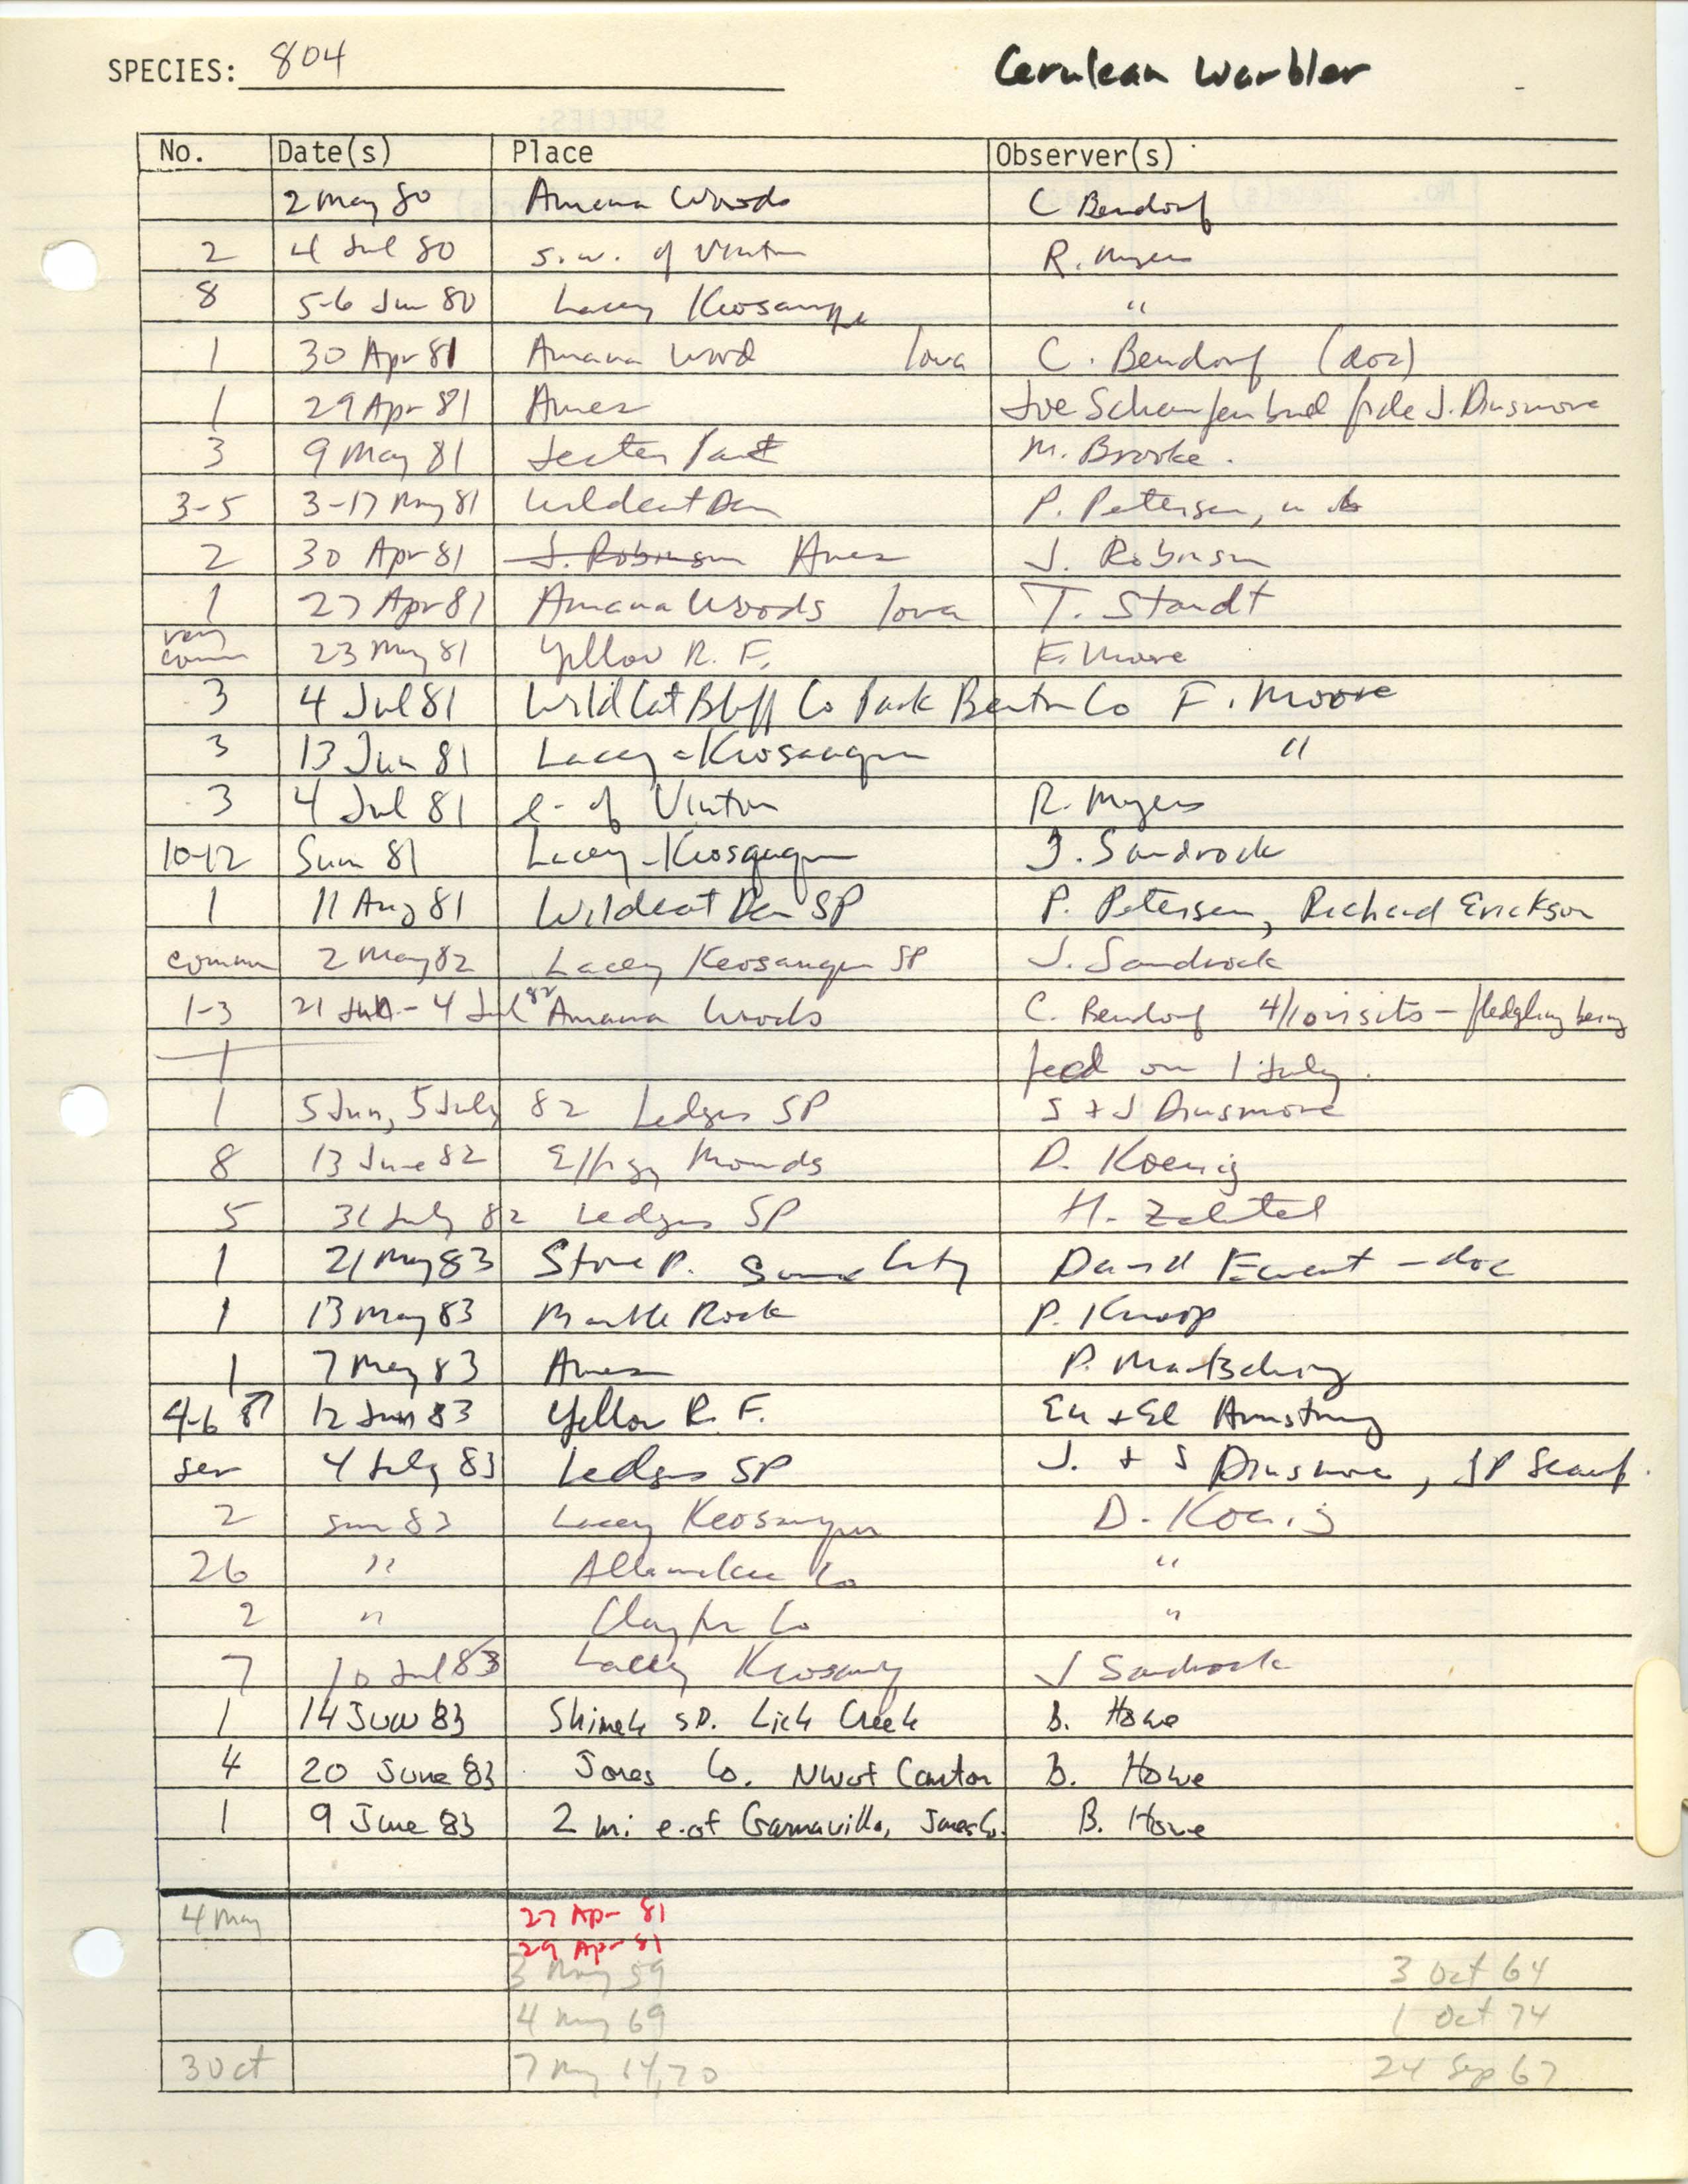 Iowa Ornithologists' Union, field report compiled data, Cerulean Warbler, 1980-1983